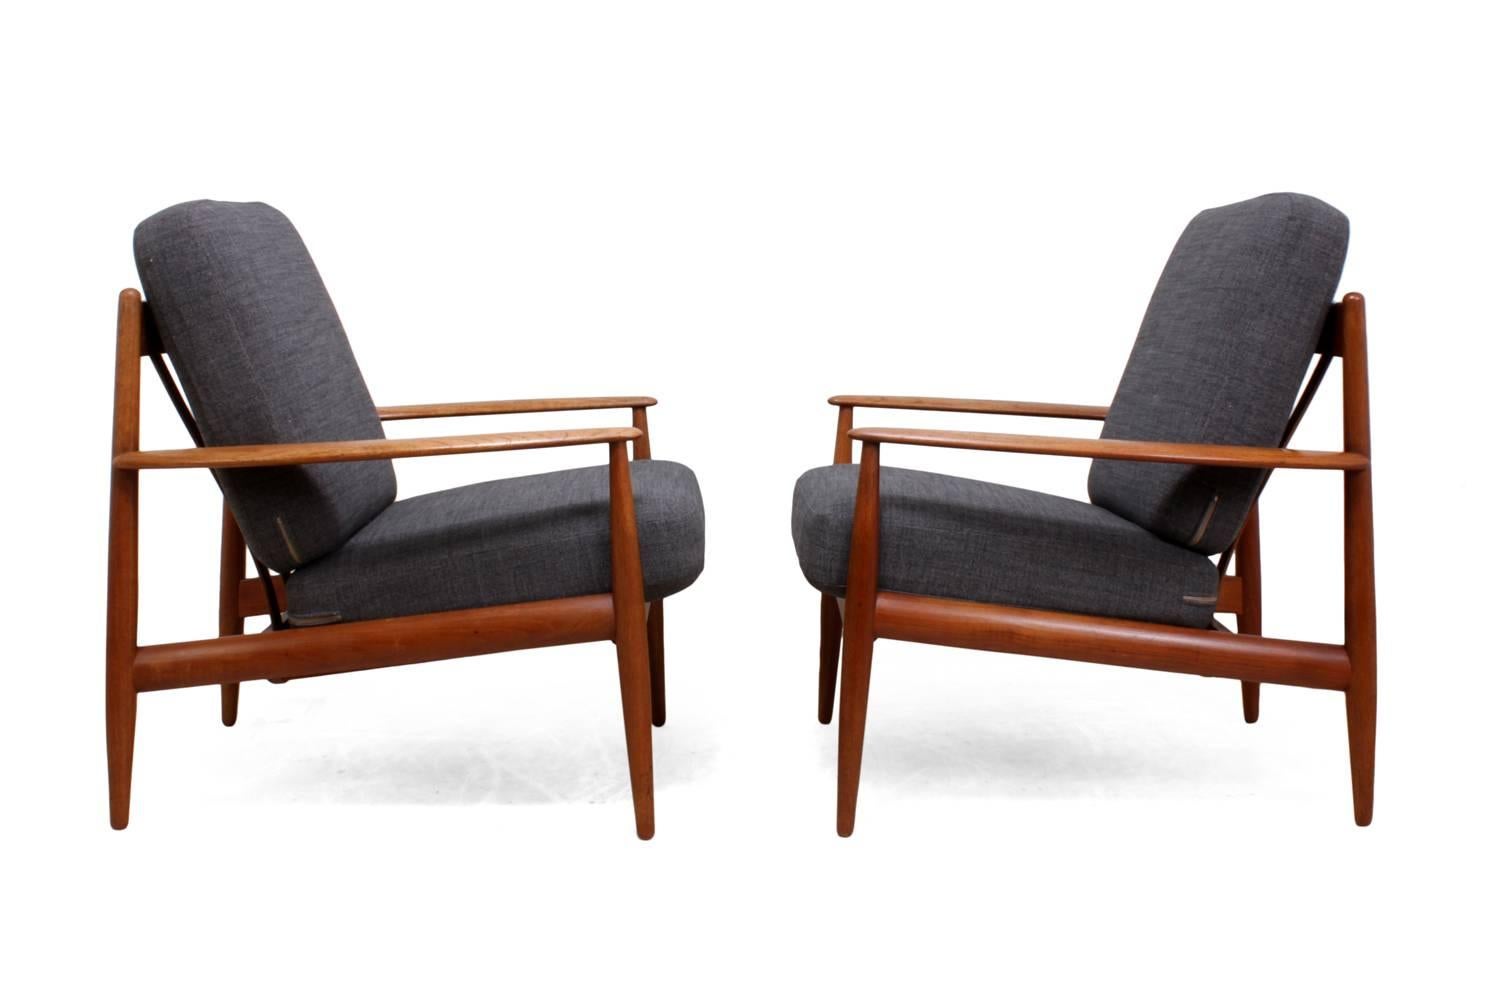 Mid-20th Century Pair of Teak Armchairs by Grete Jalk for France and Son